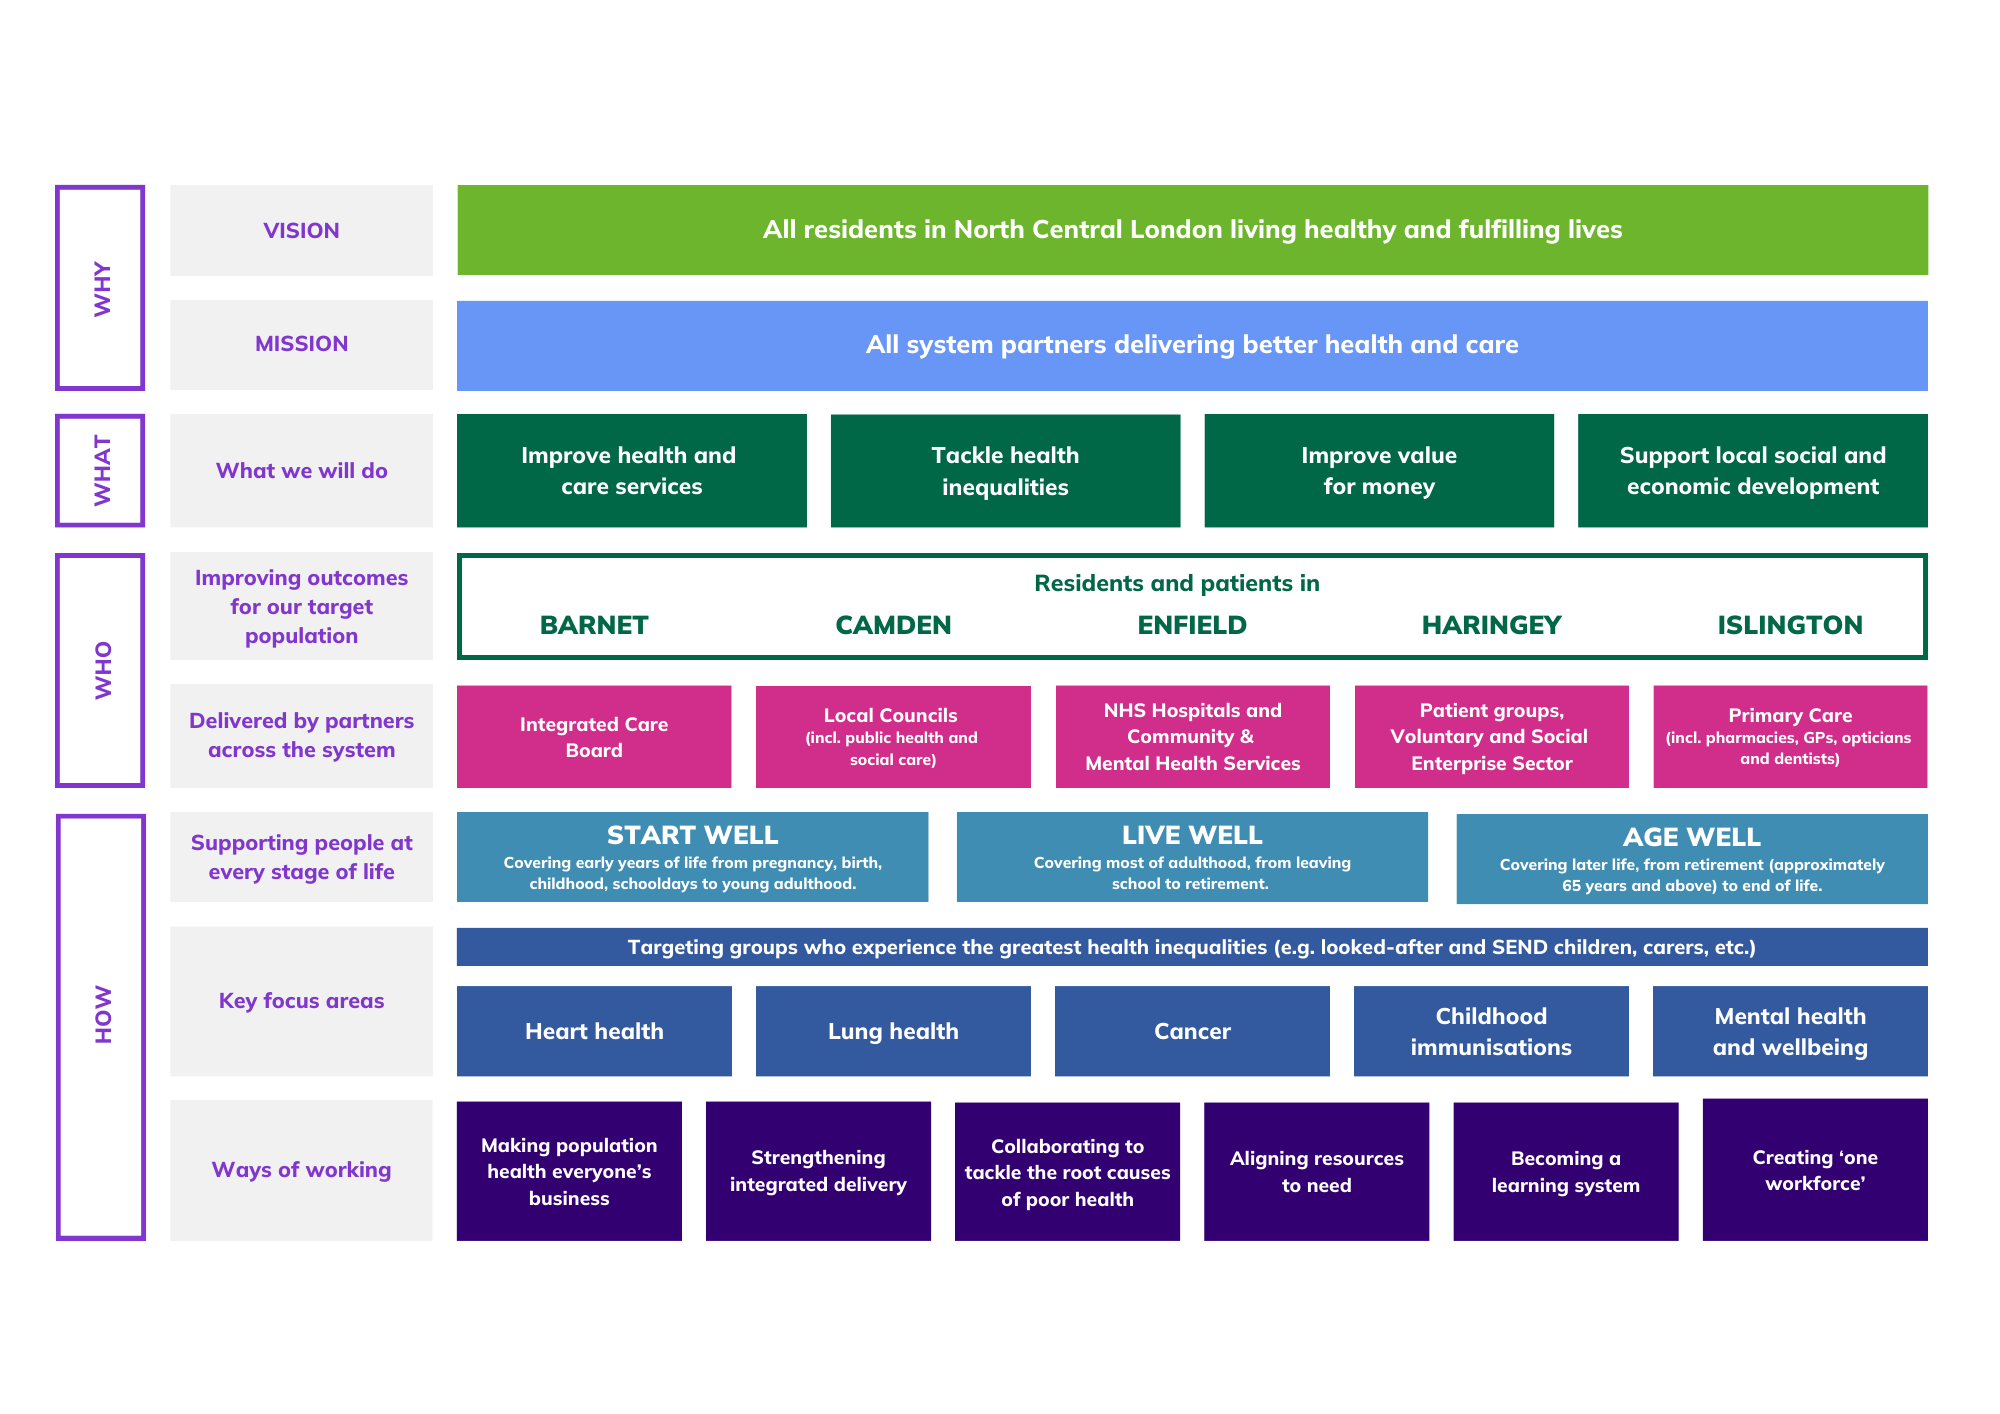 Diagram outlining the partners and priorities of the NCL ICB